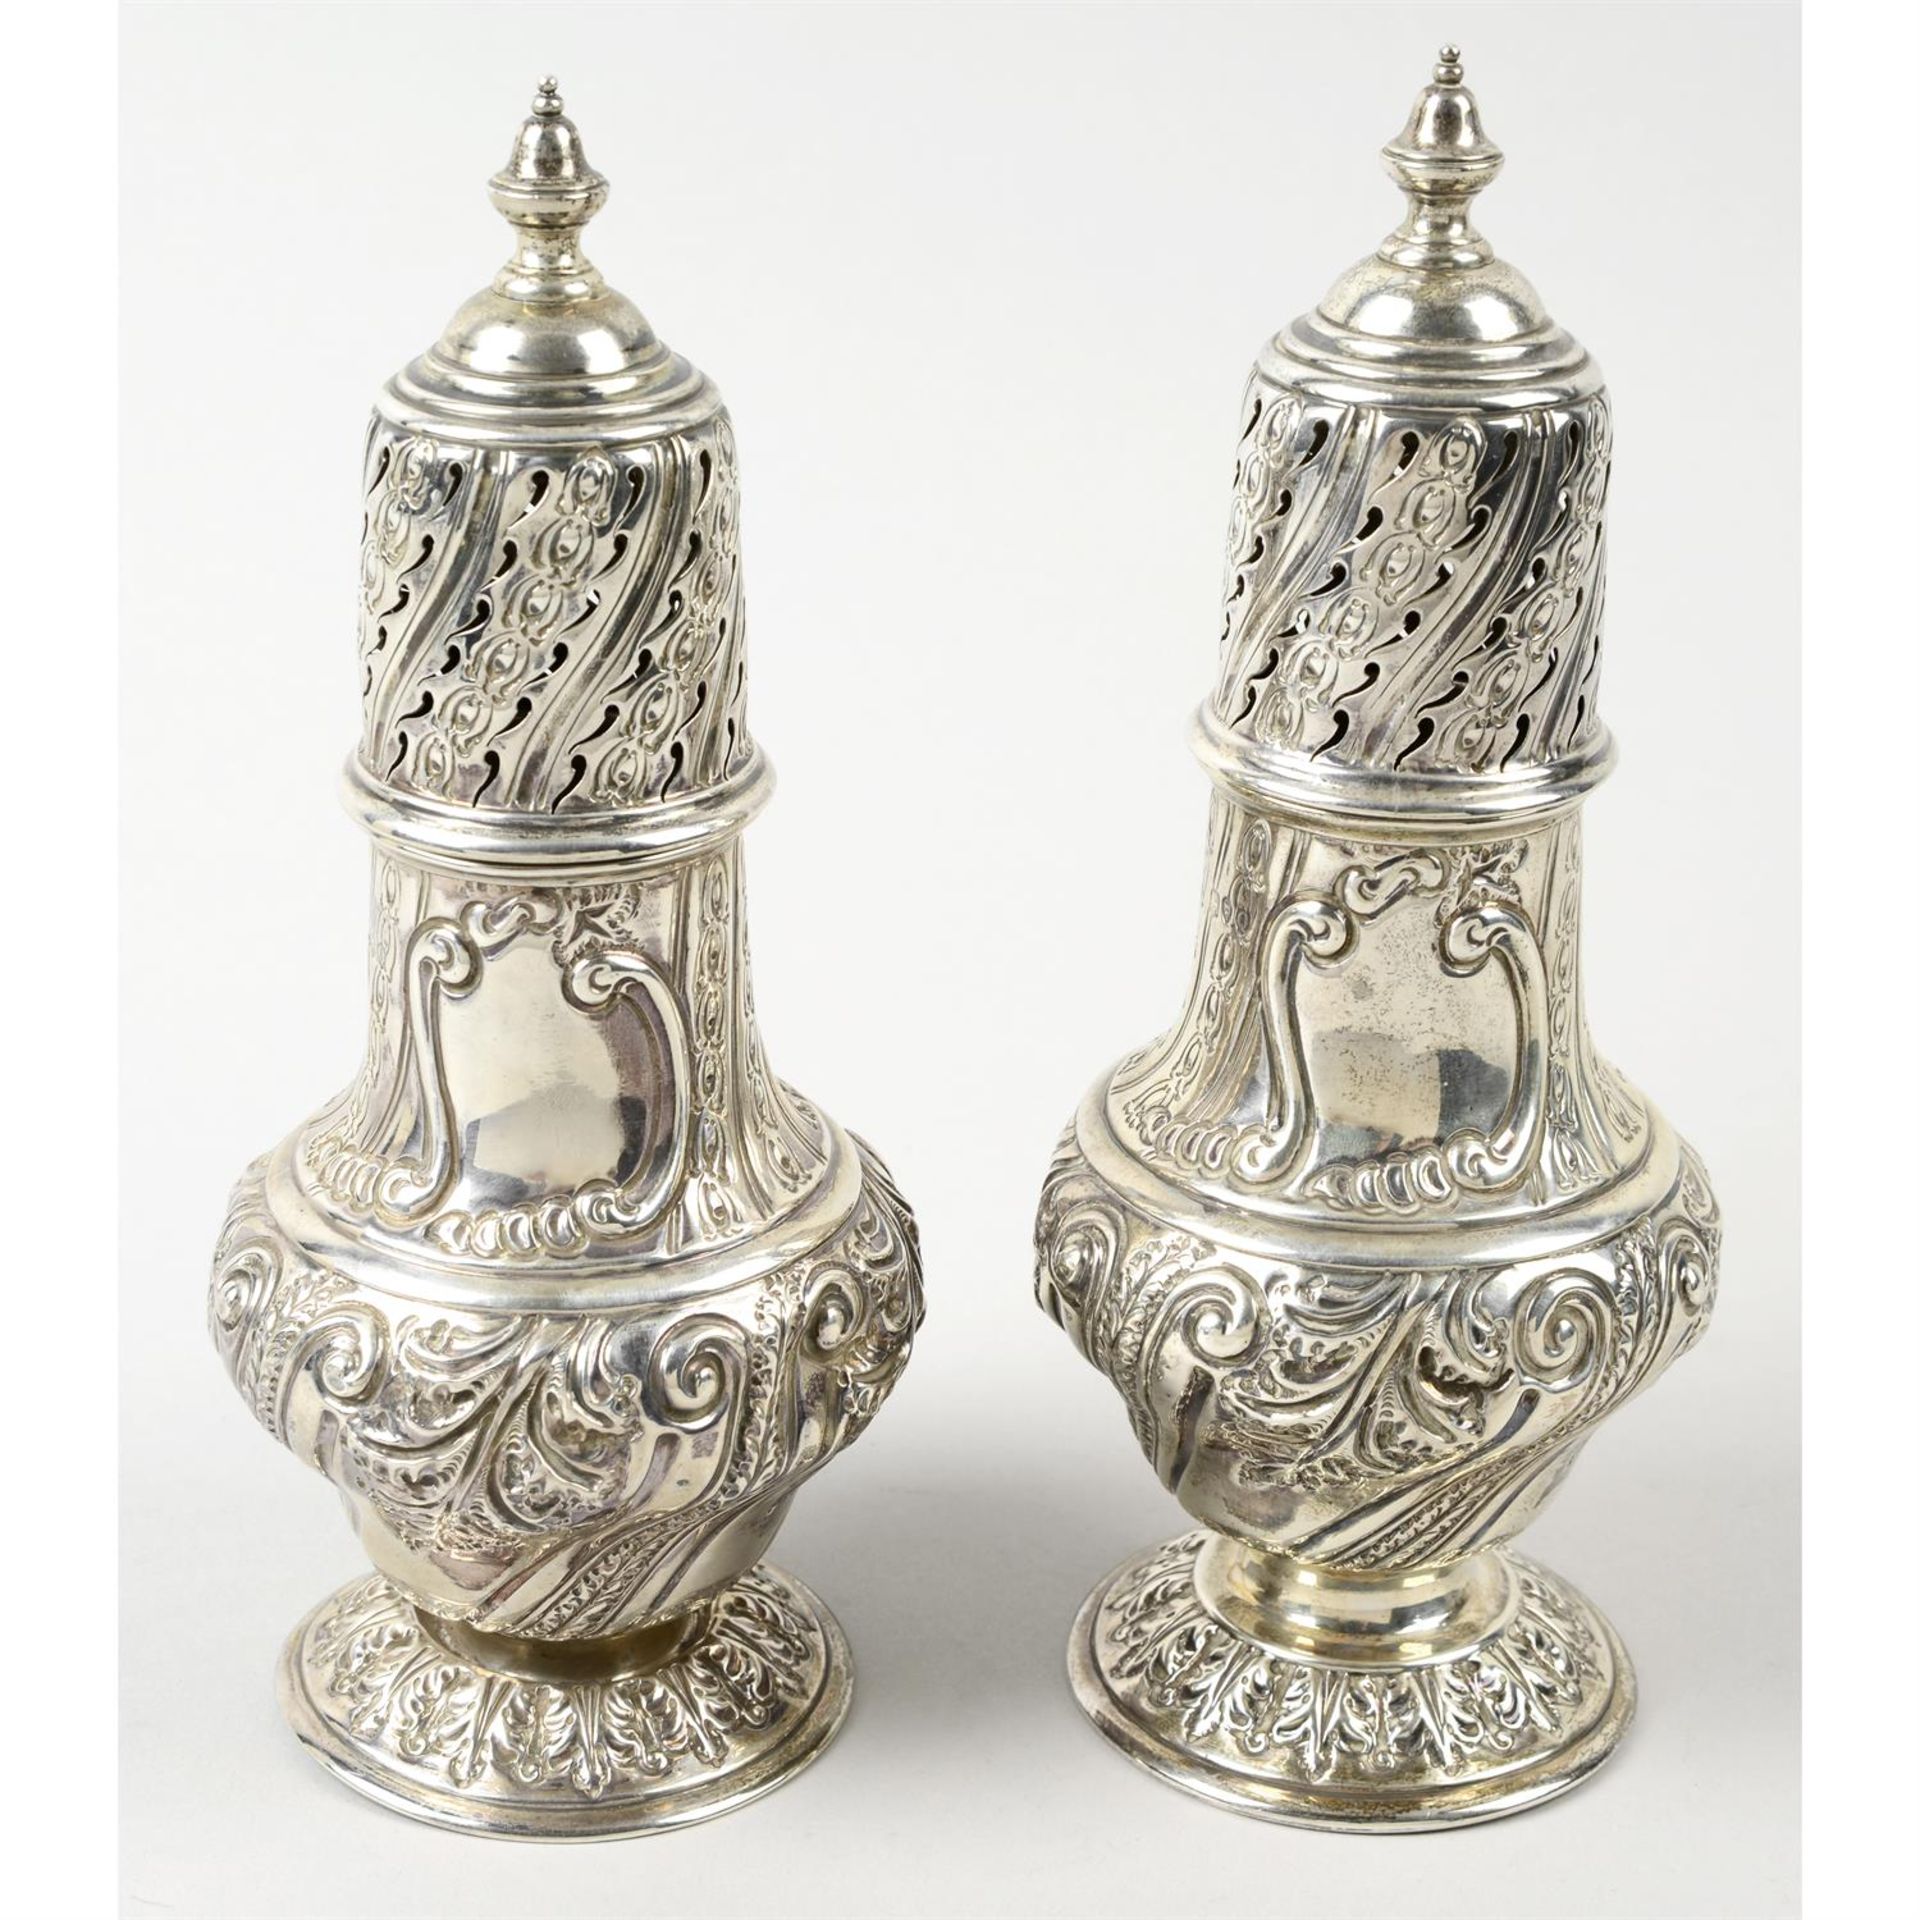 A matched pair of late Victorian silver large casters.